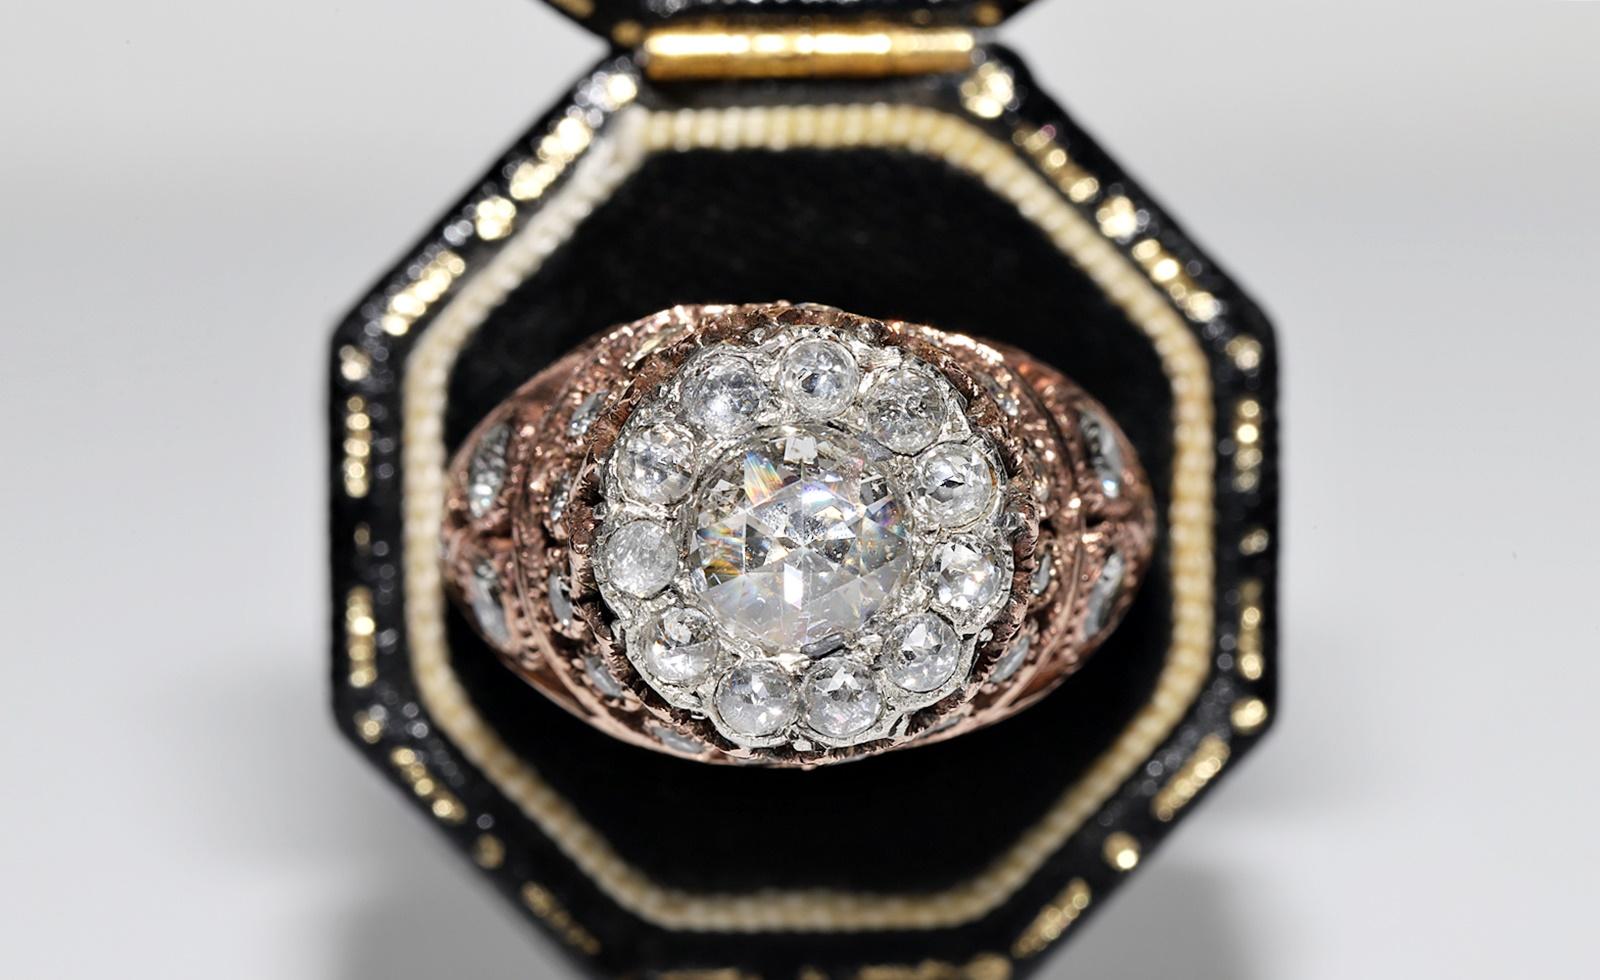 In very good condition.
Total weight is 8.4 grams.
Totally main rose cut diamond 0.91 ct.
Totally all rose cut diamond 1.70 ct.
Totally is side brilliant cut diamond 0.90 ct.
The diamond is has G-H color and vvs-vs-s1 clarity.
Ring size is US 7 (We